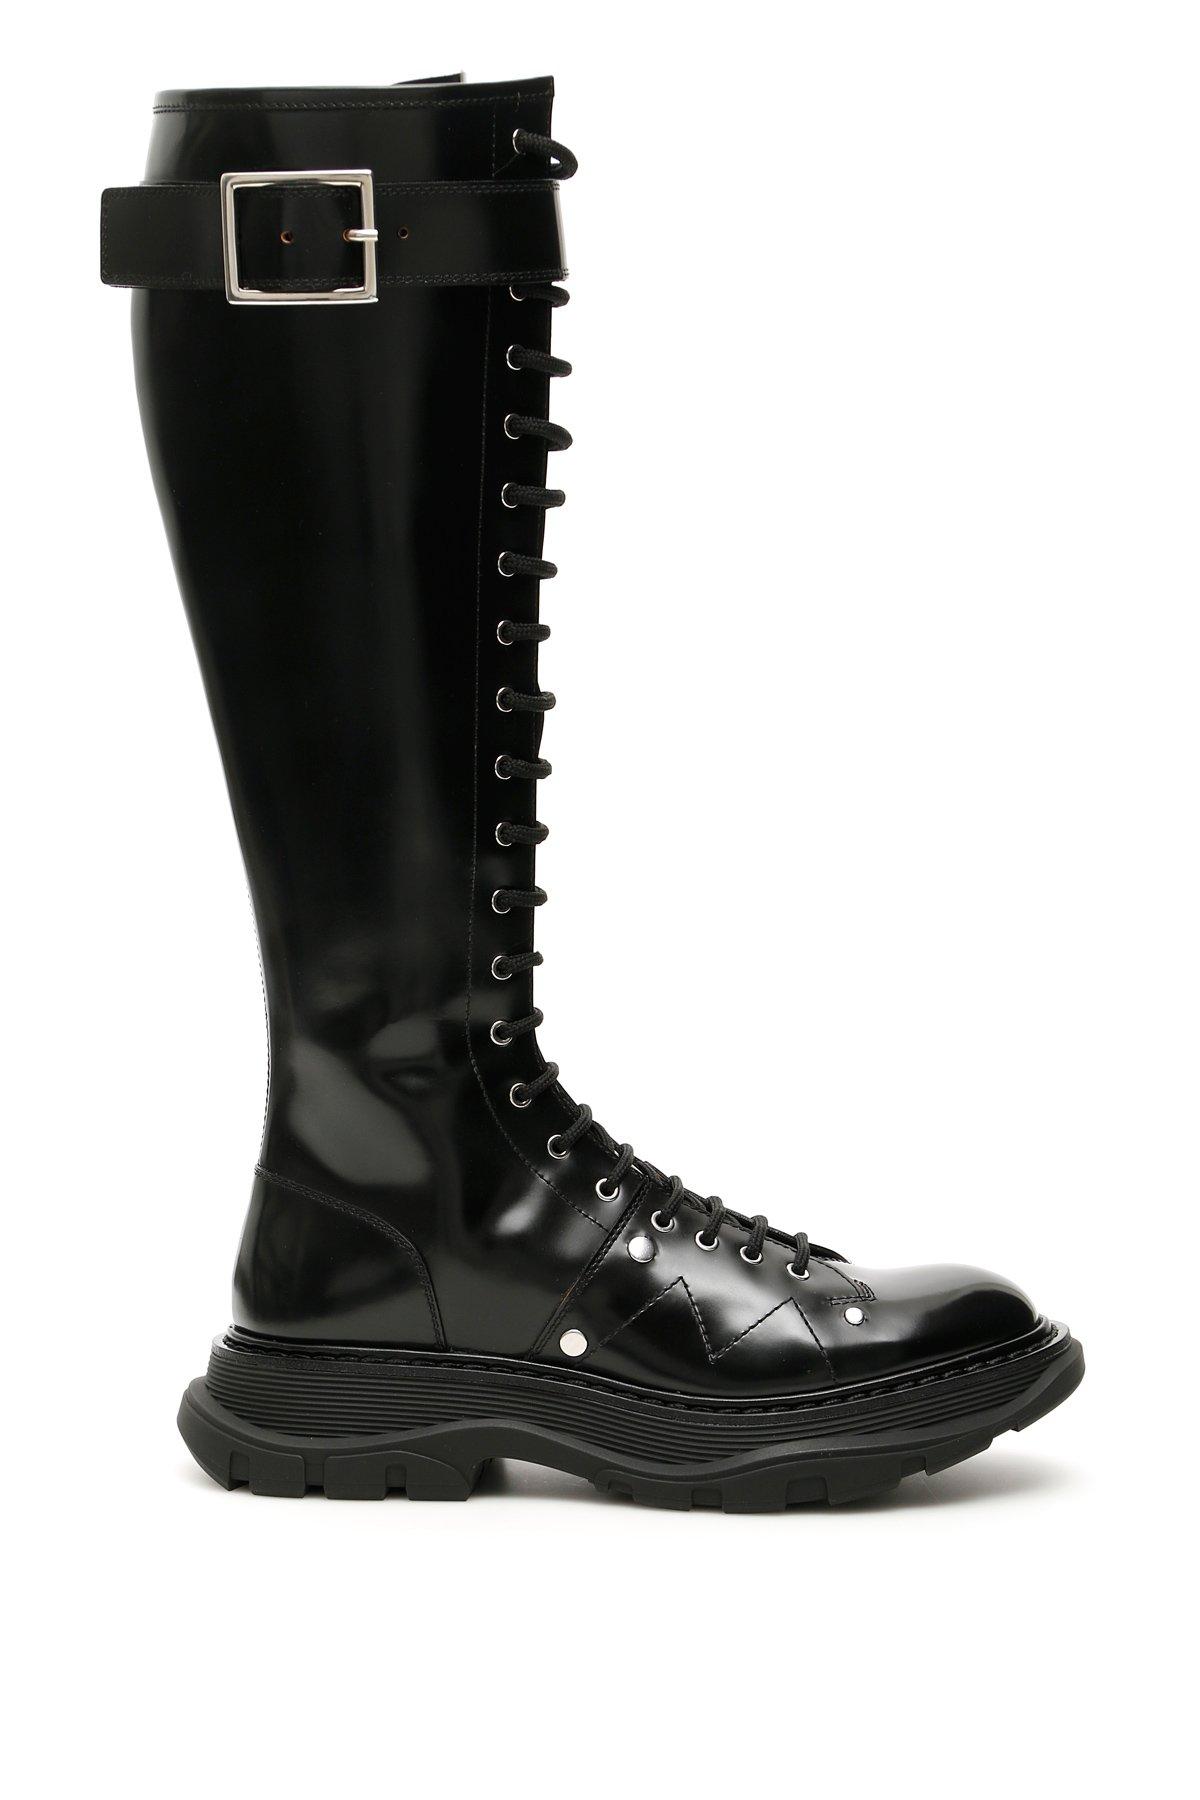 Alexander McQueen Leather Buckle Detail Knee High Boots in Black - Lyst